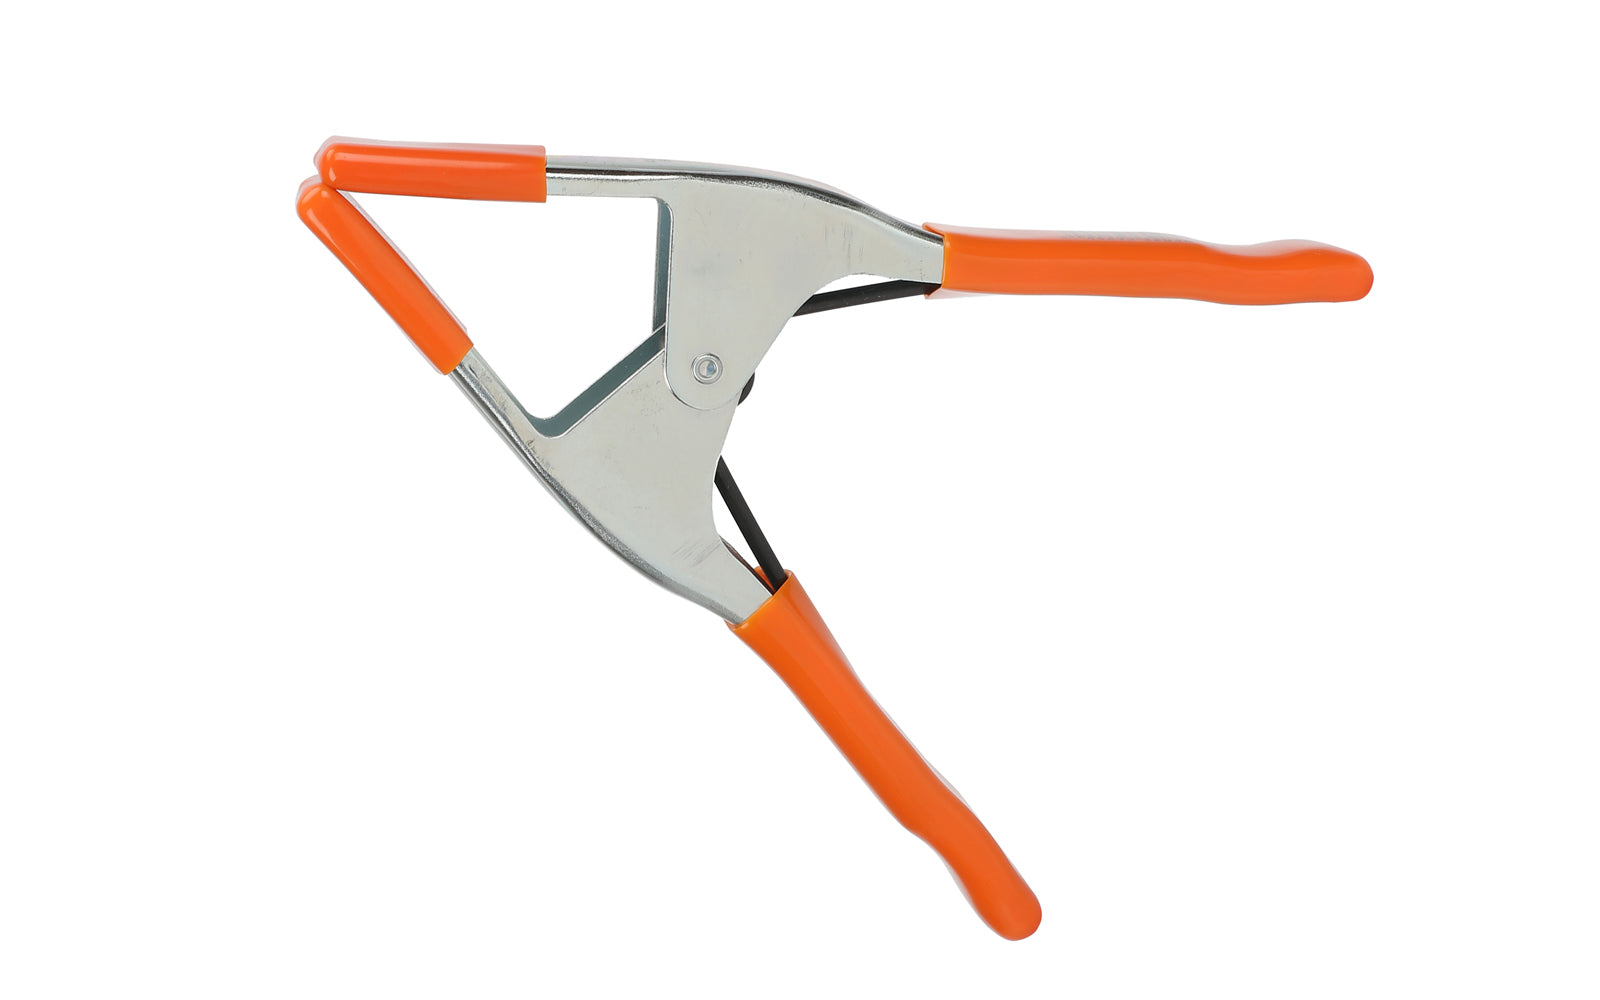 Pony 3" Opening Classic Spring Clamp ~ No. 3203-HT - Pony Jorgensen - With protected poly-vinyl handles & tips - Vinyl Cushion Handles - protected handles & jaw tips mean you can use them on metal, wood, plastic, fabric - Steel Spring Clamp